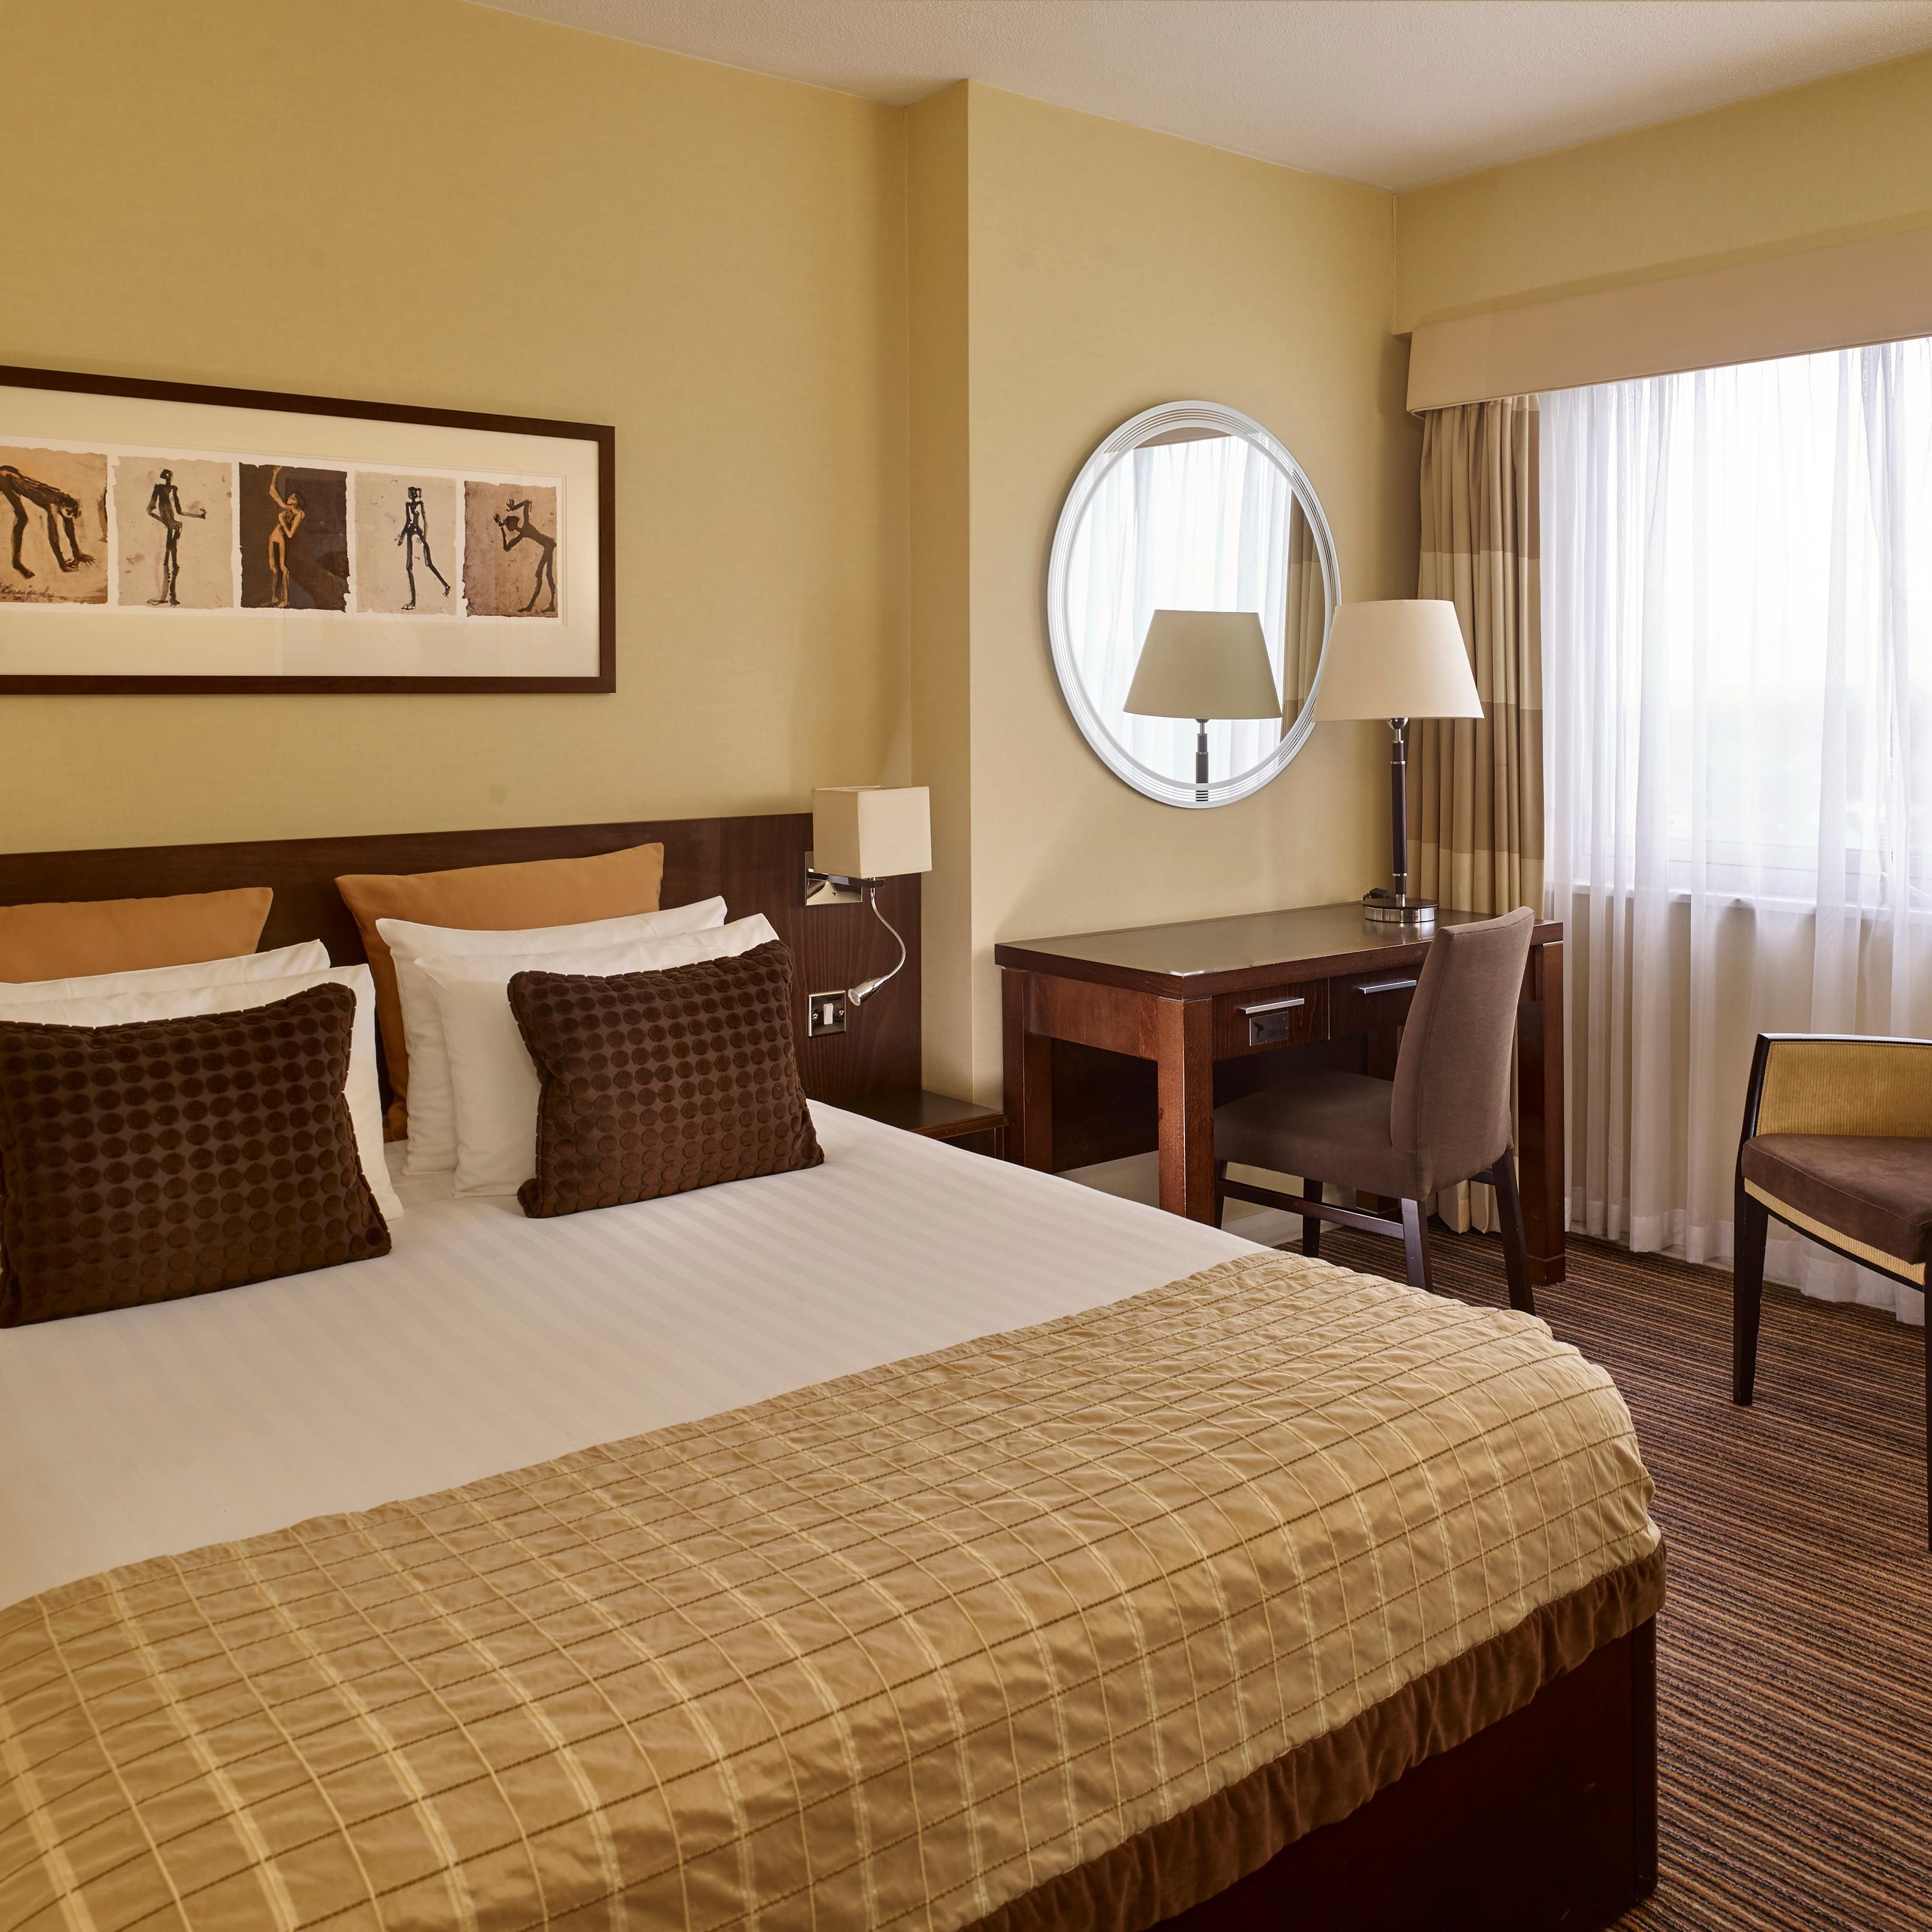 Make yourself at home in our light and airy standard rooms